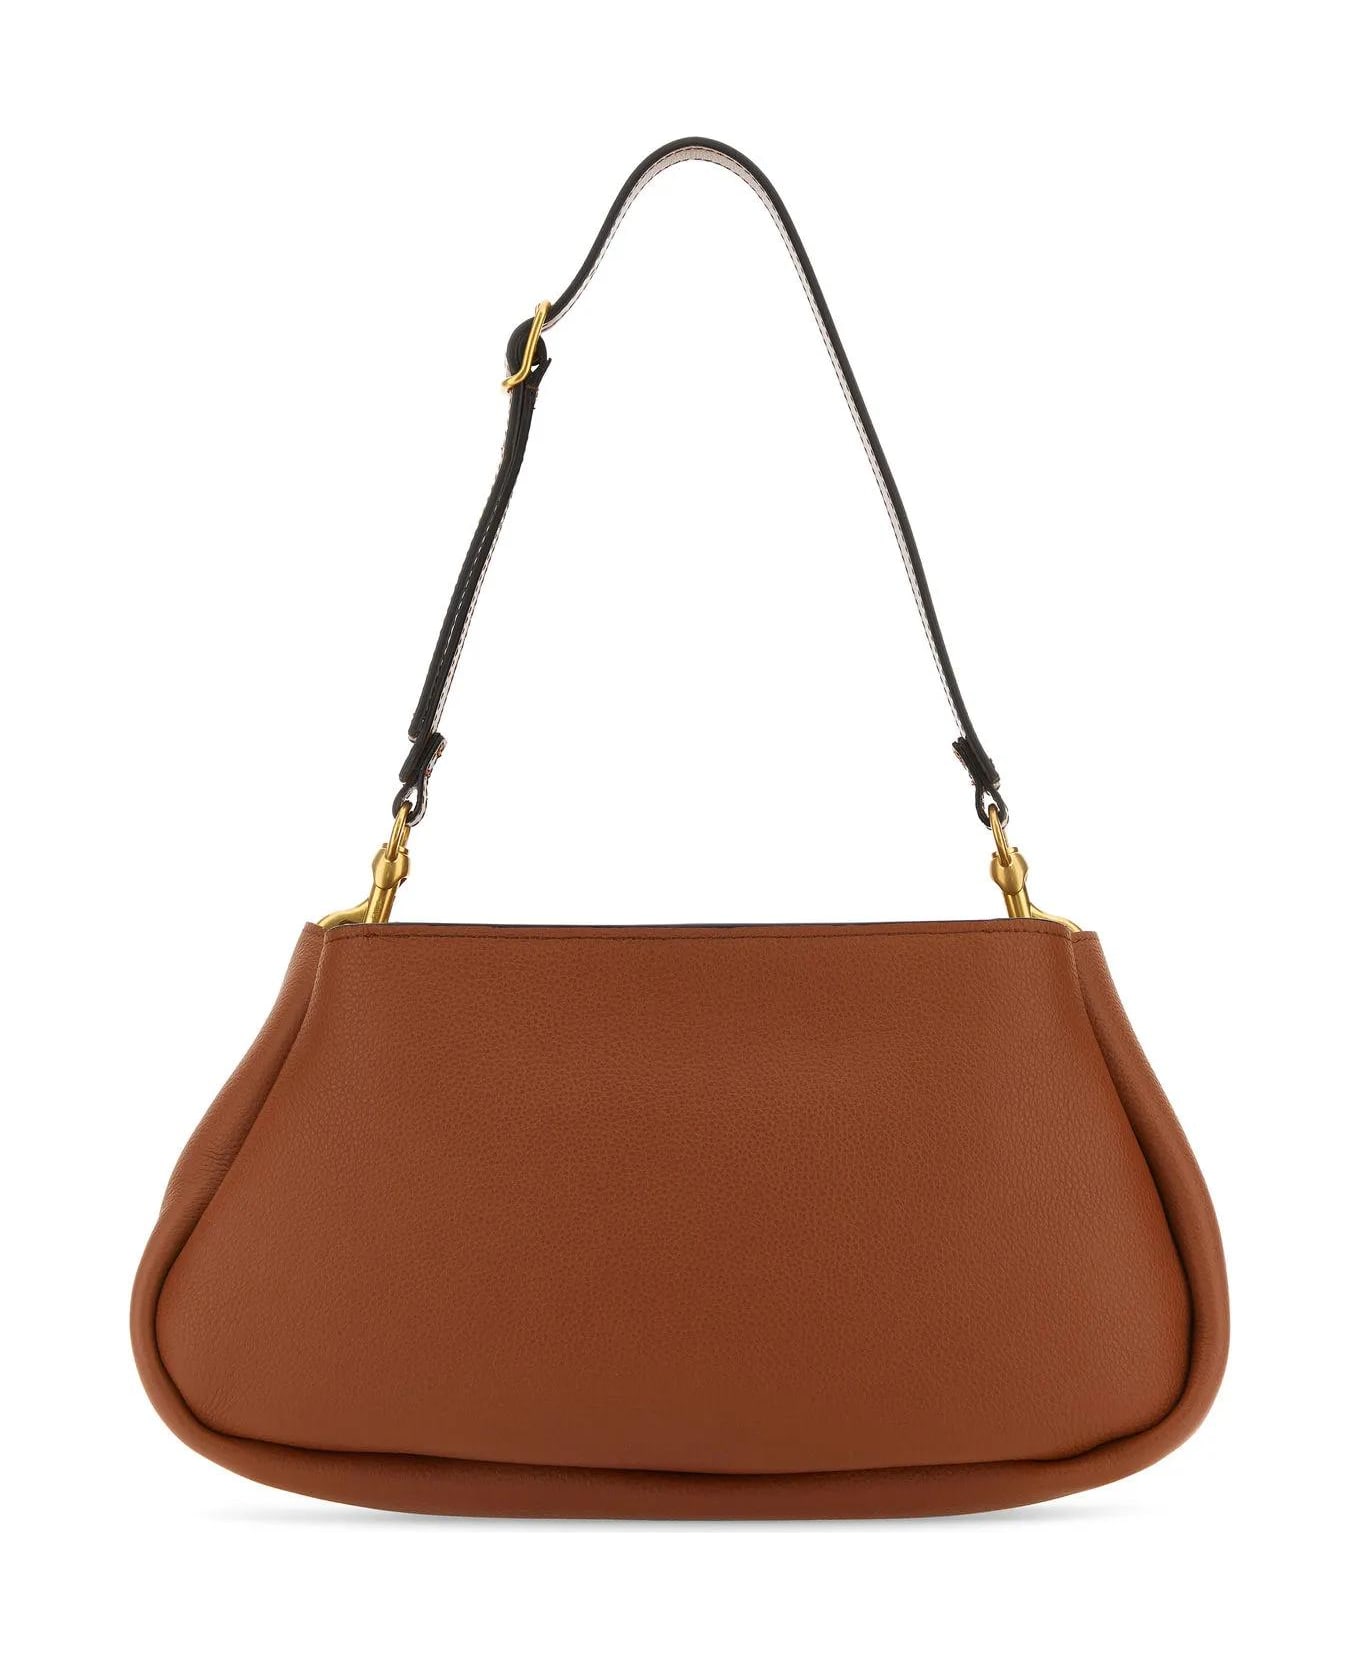 Chloé Brown Leather Marcie Clutch - Leather Brown トートバッグ